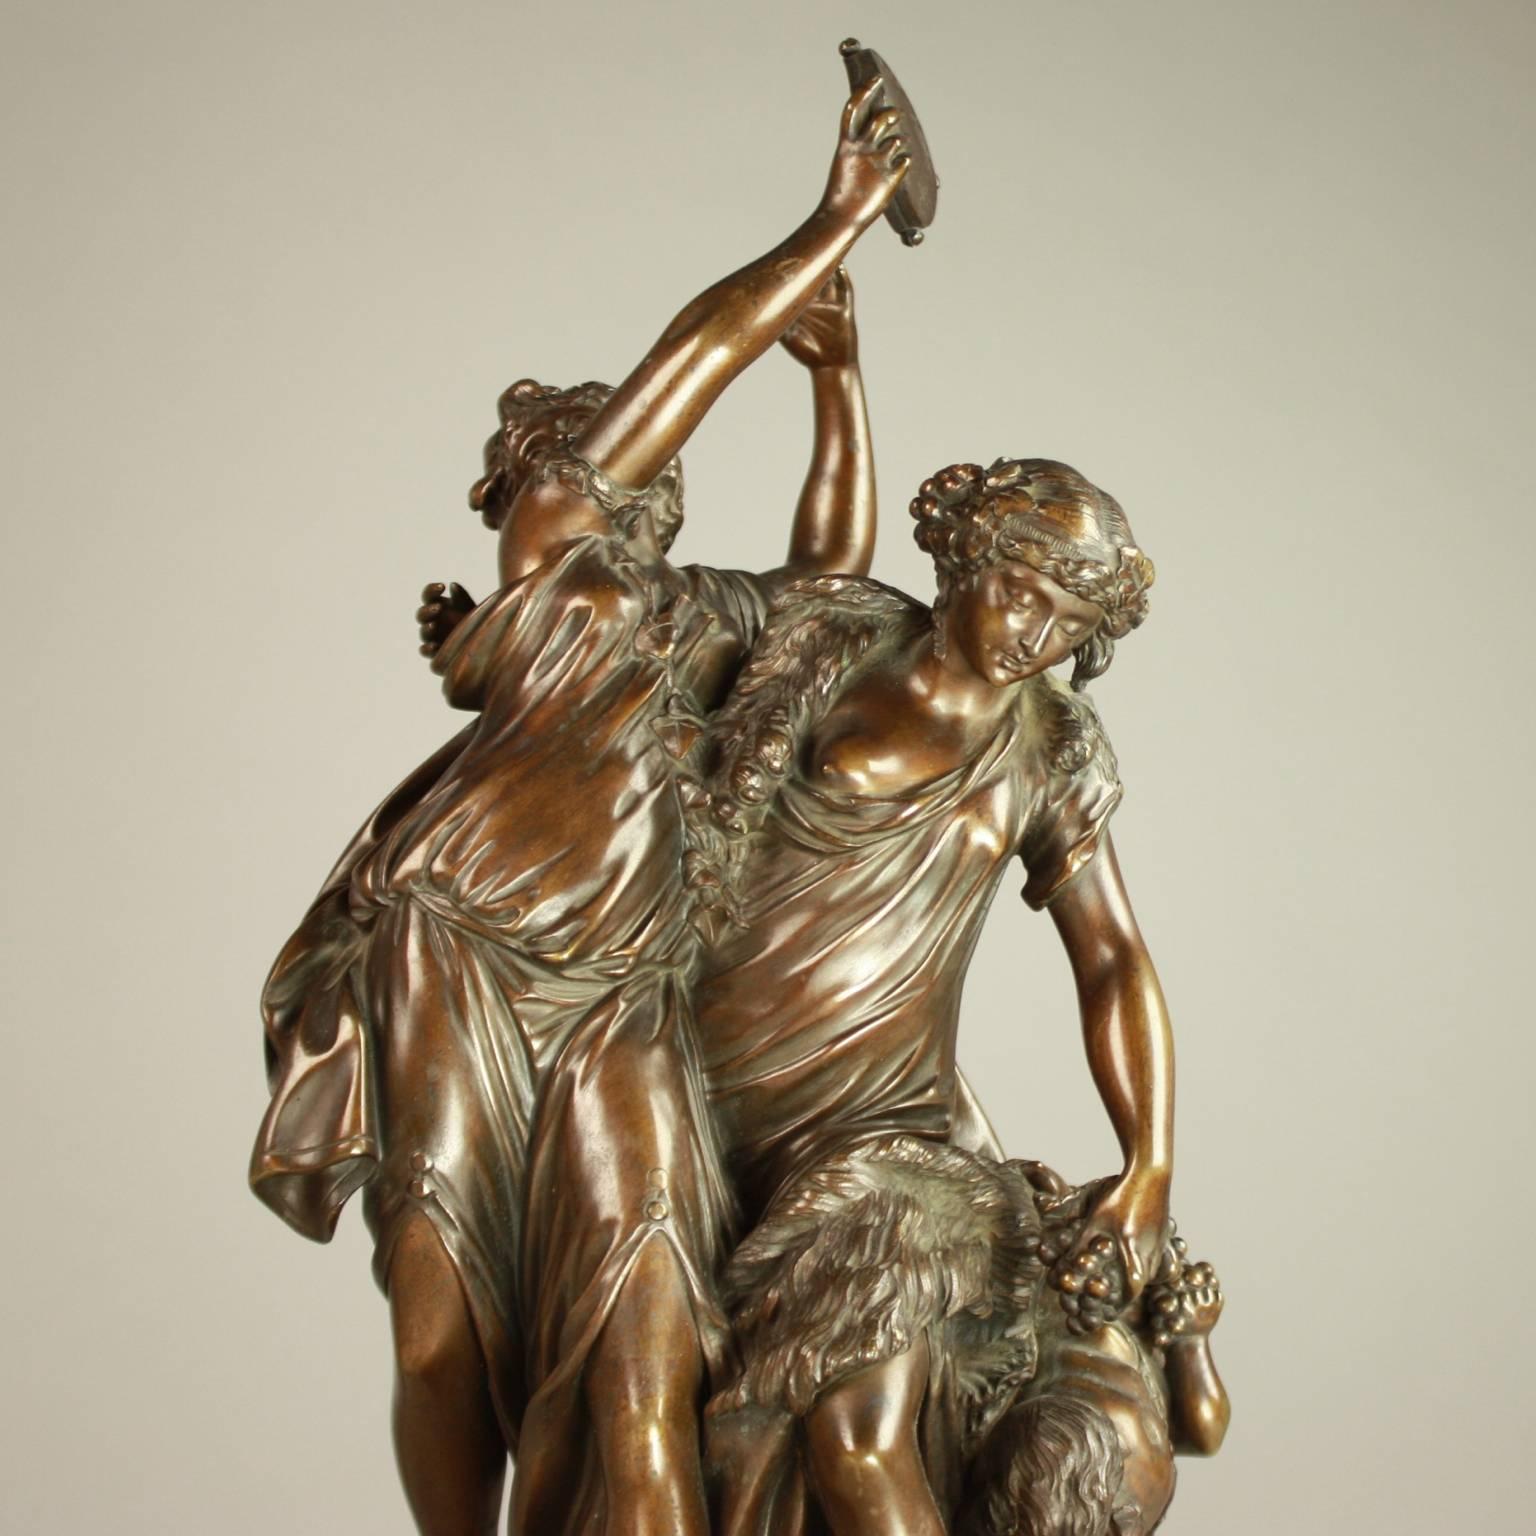 19th Century French Patinated Bronze Sculpture of Bacchanalia, after Clodion